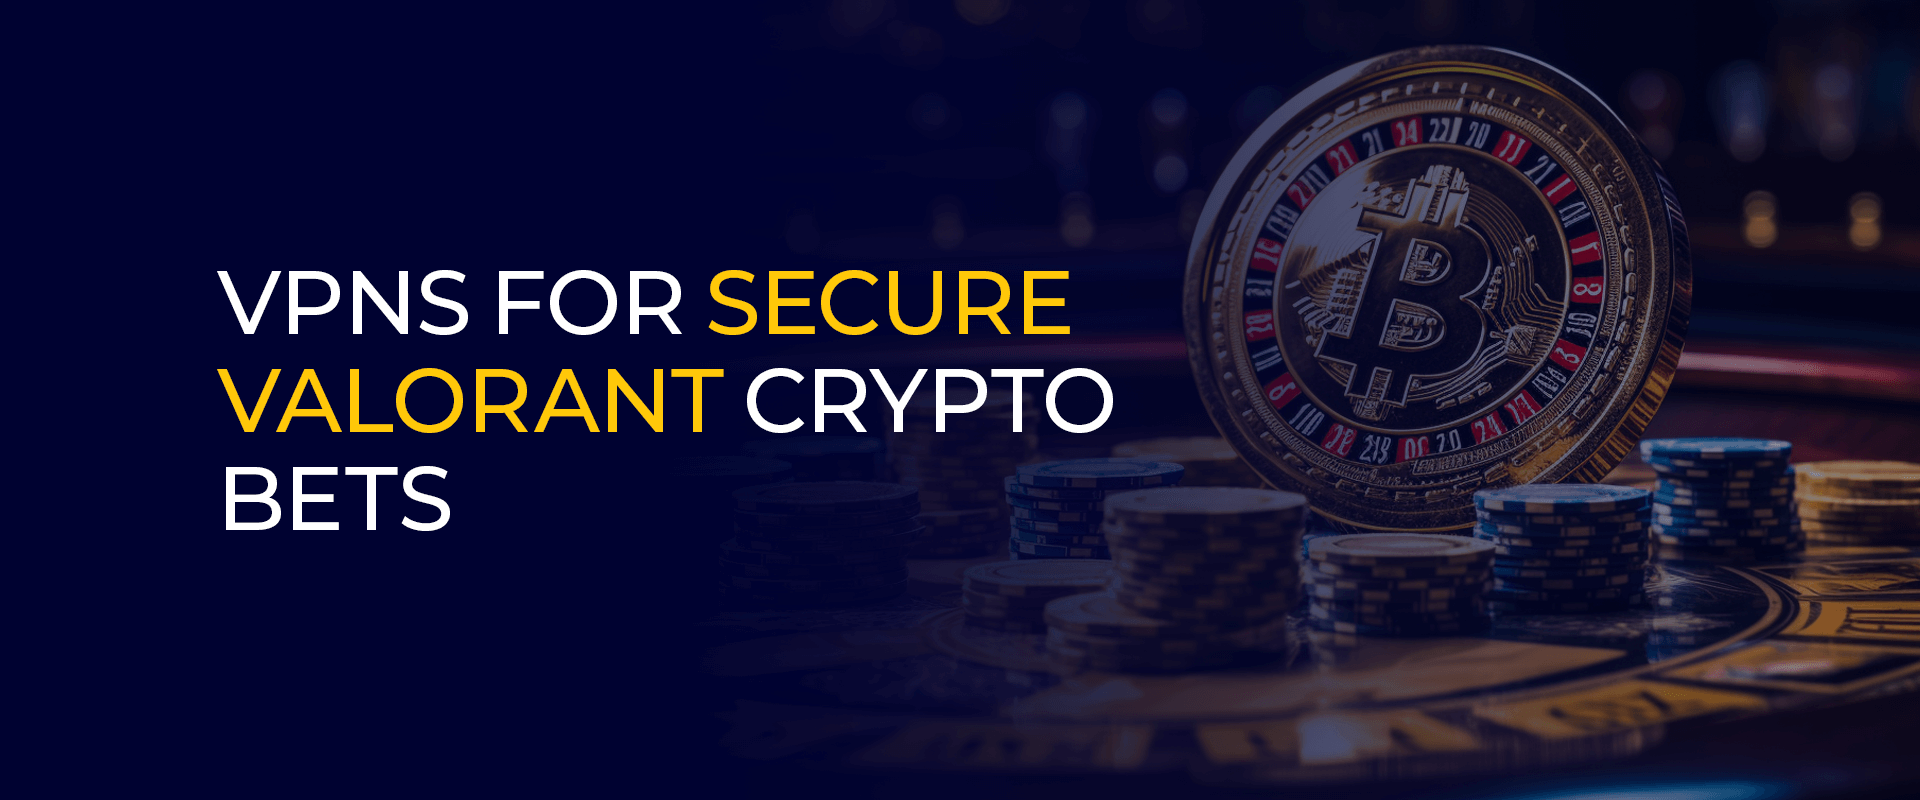 Vpns for Secure Valorant Crypto Bets